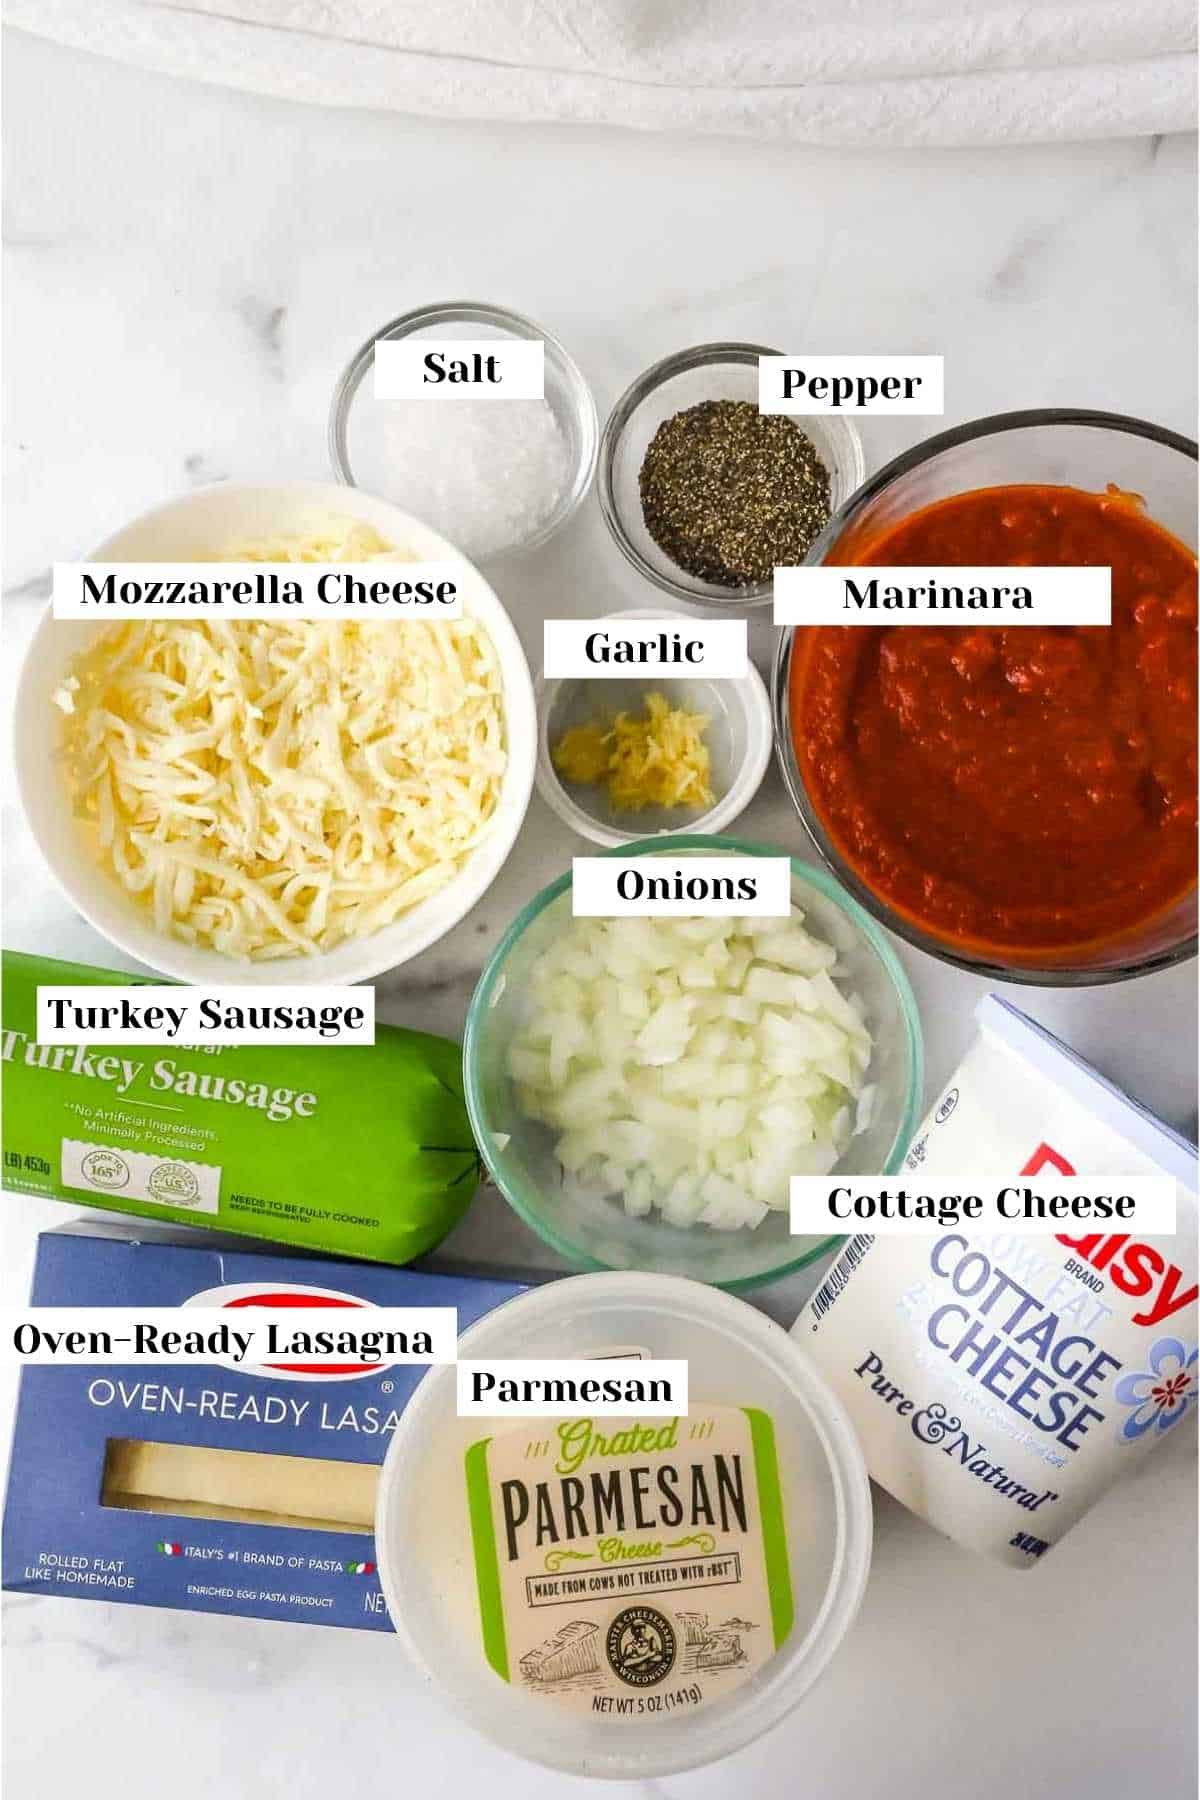 ingredients for this recipe.